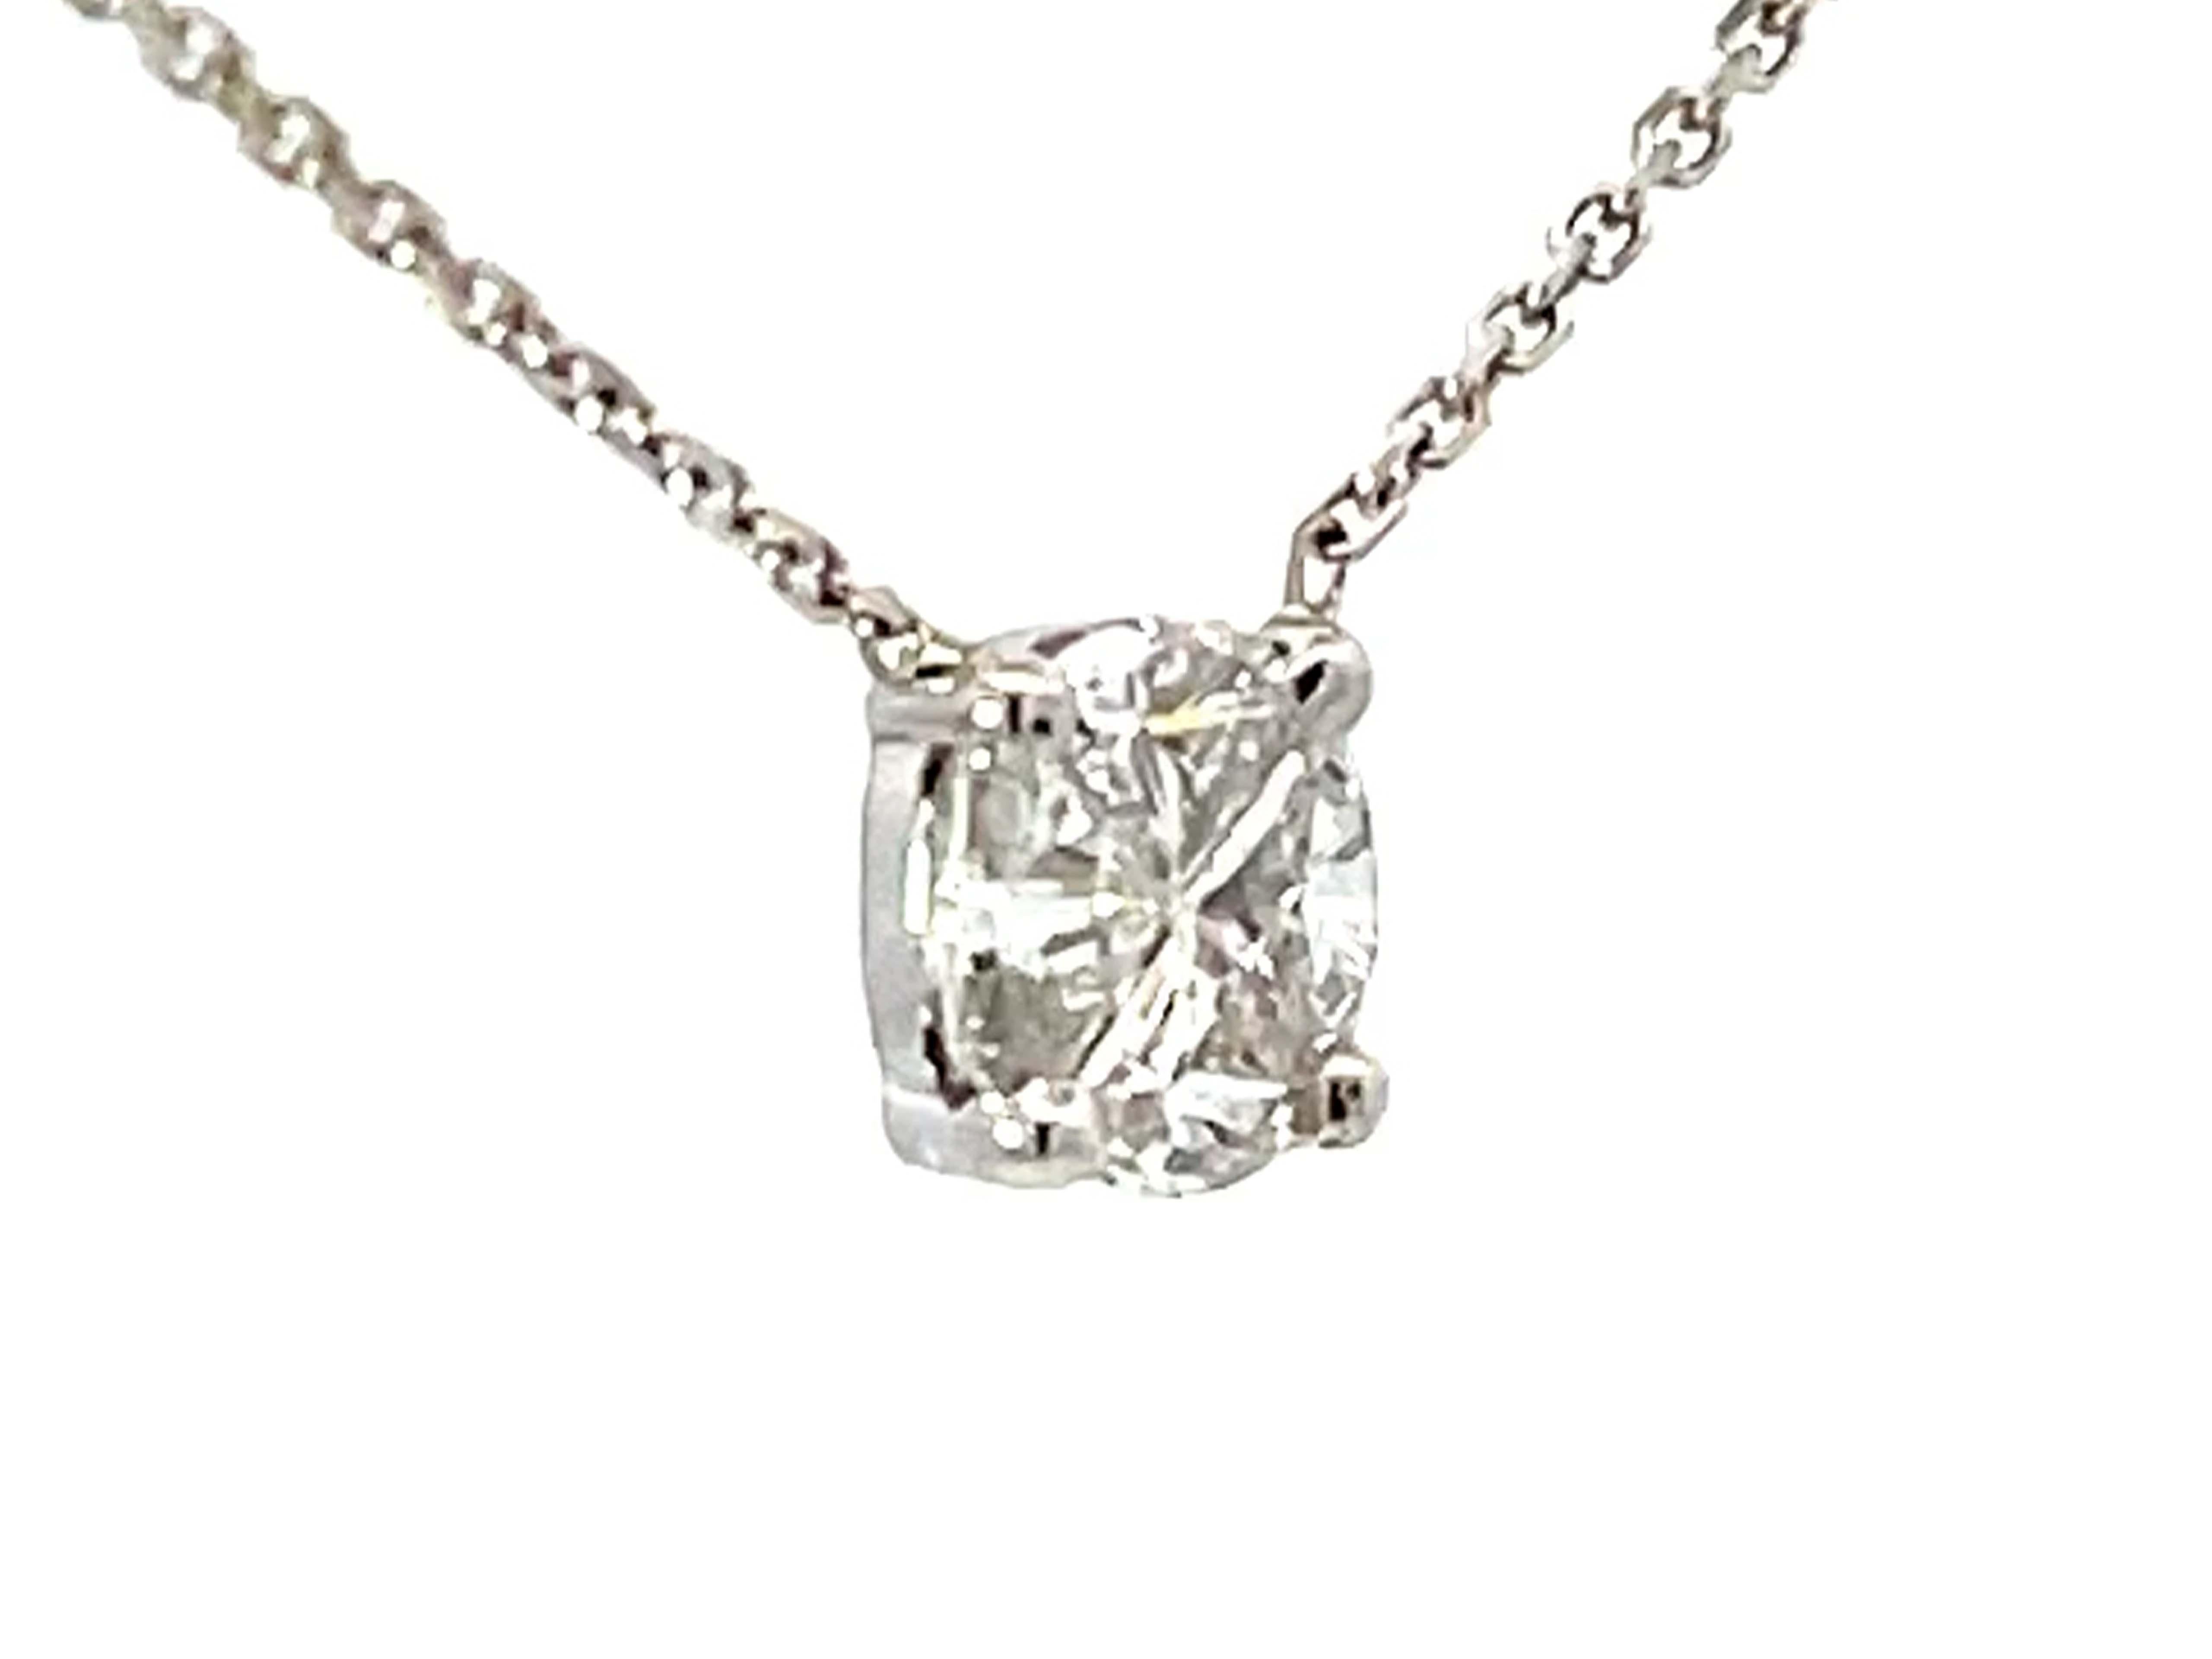 Modern Piecut Diamond Necklace Solid 18k White Gold For Sale